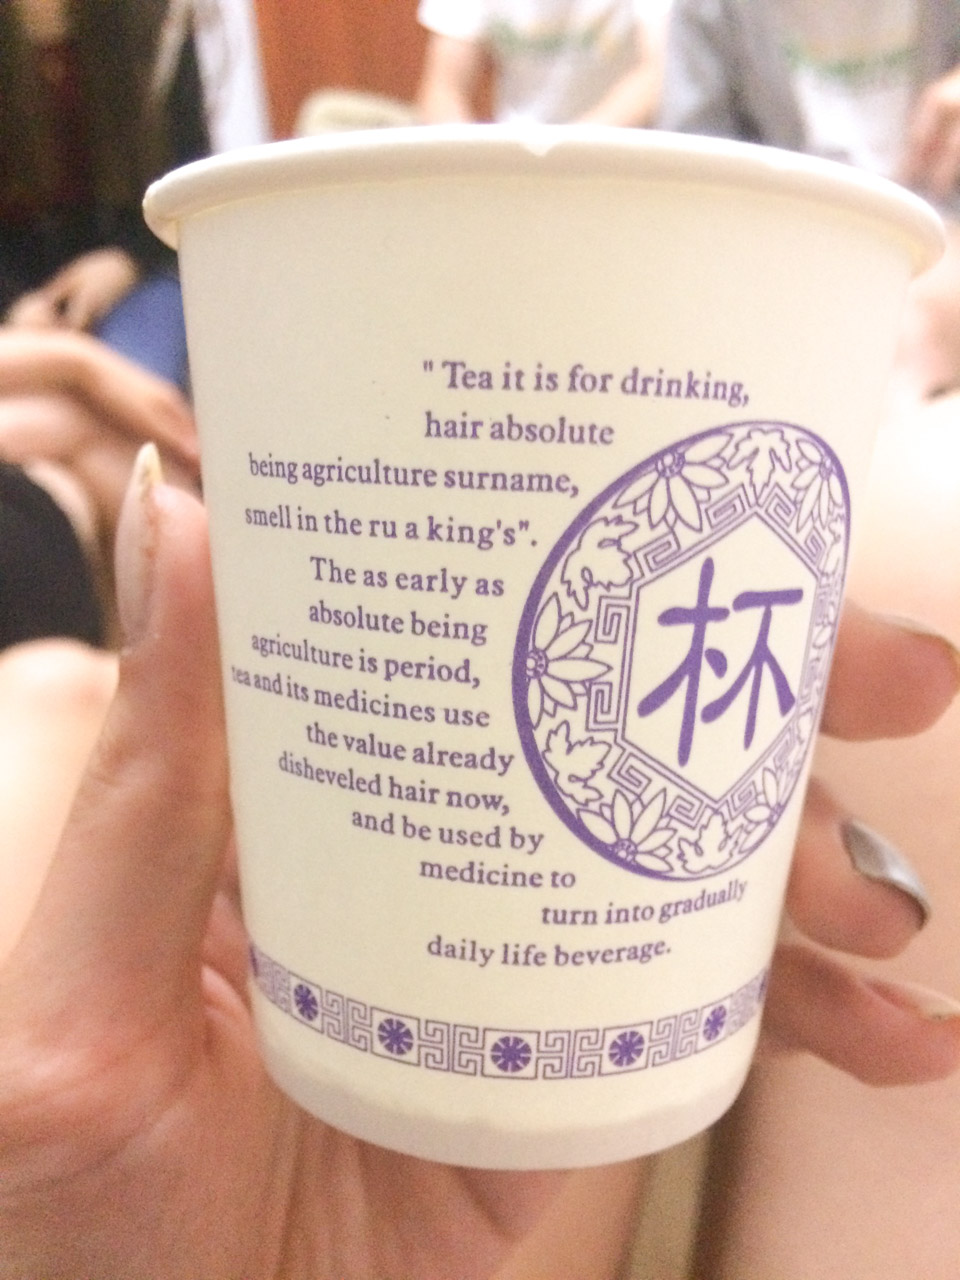 A woman's hand holding up a paper cup with a funny Chinese translation written on it